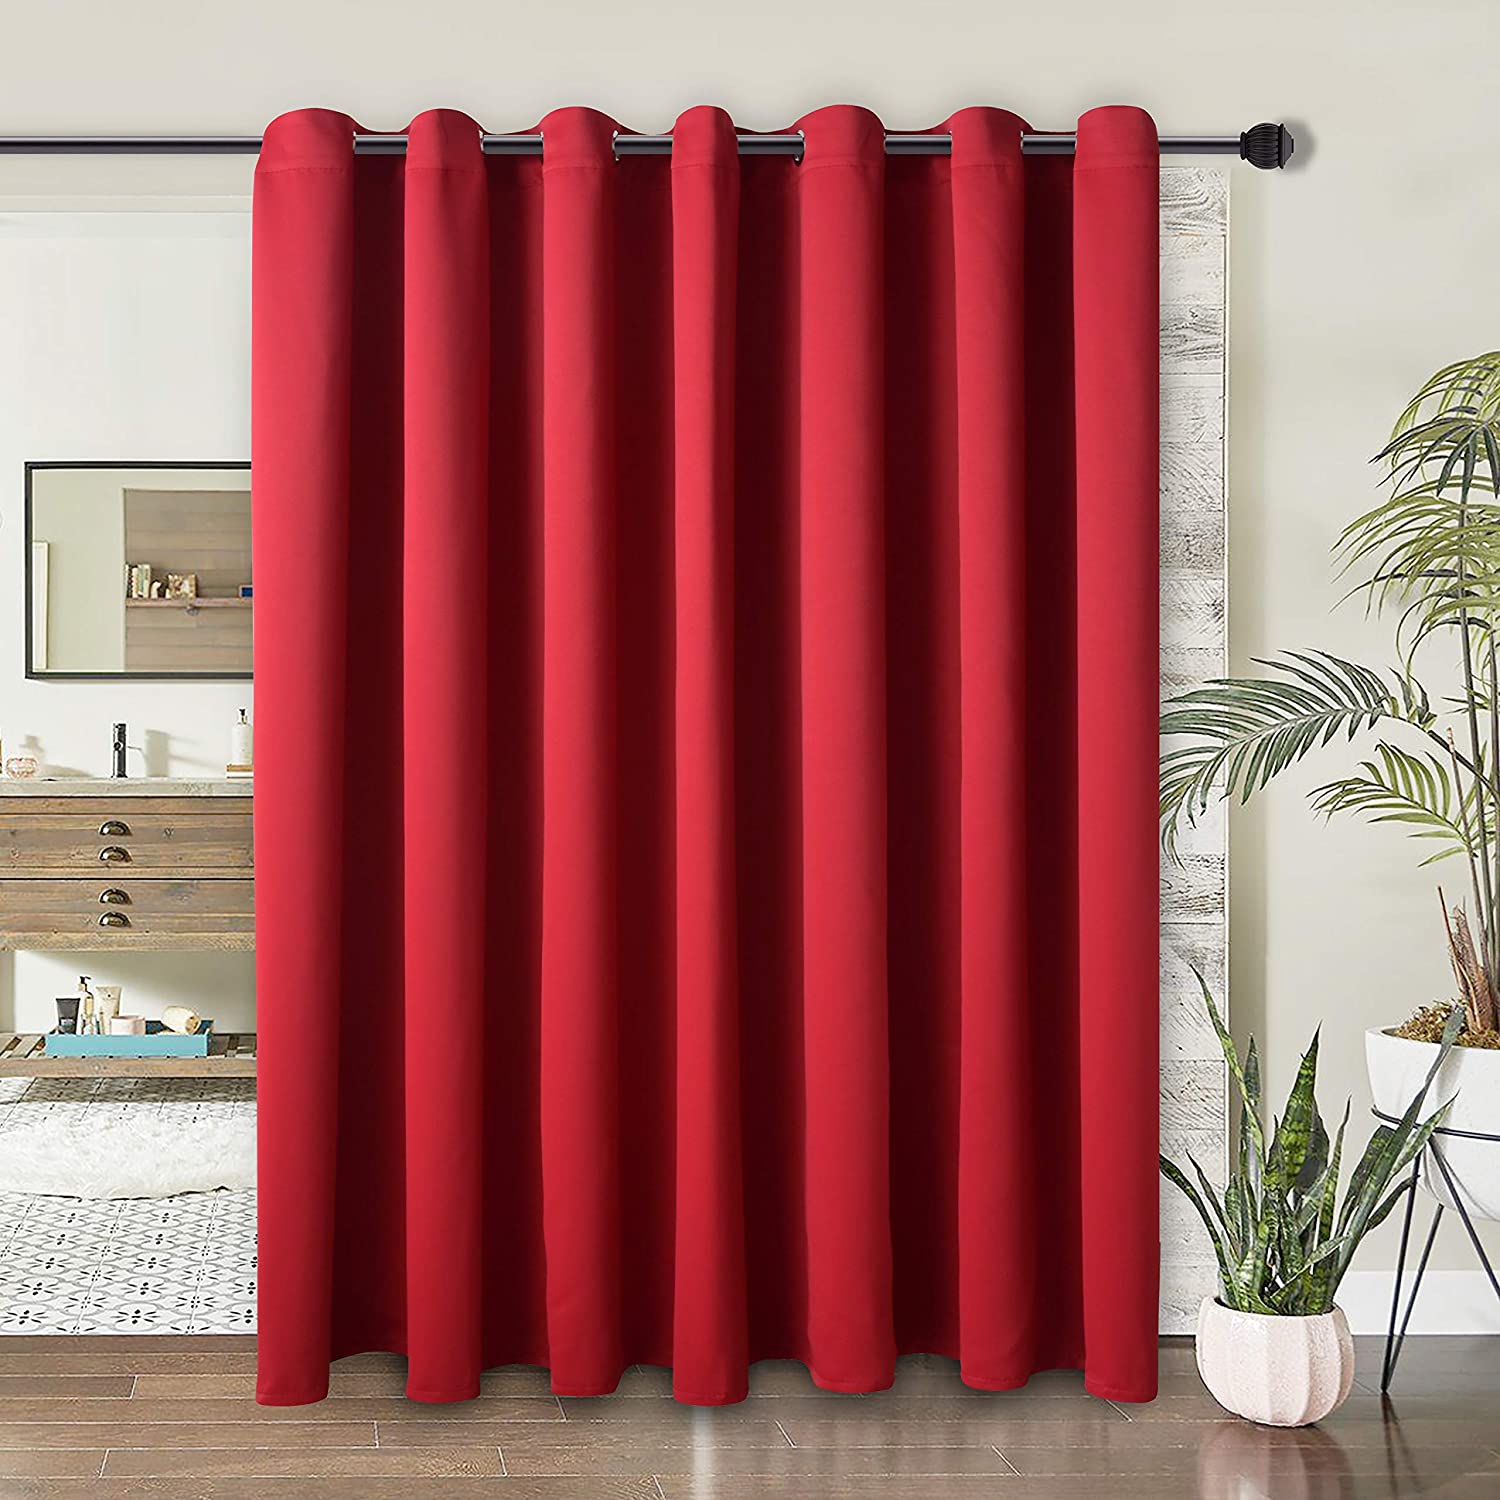 Review of WONTEX Room Divider Curtain - Privacy Blackout Curtains